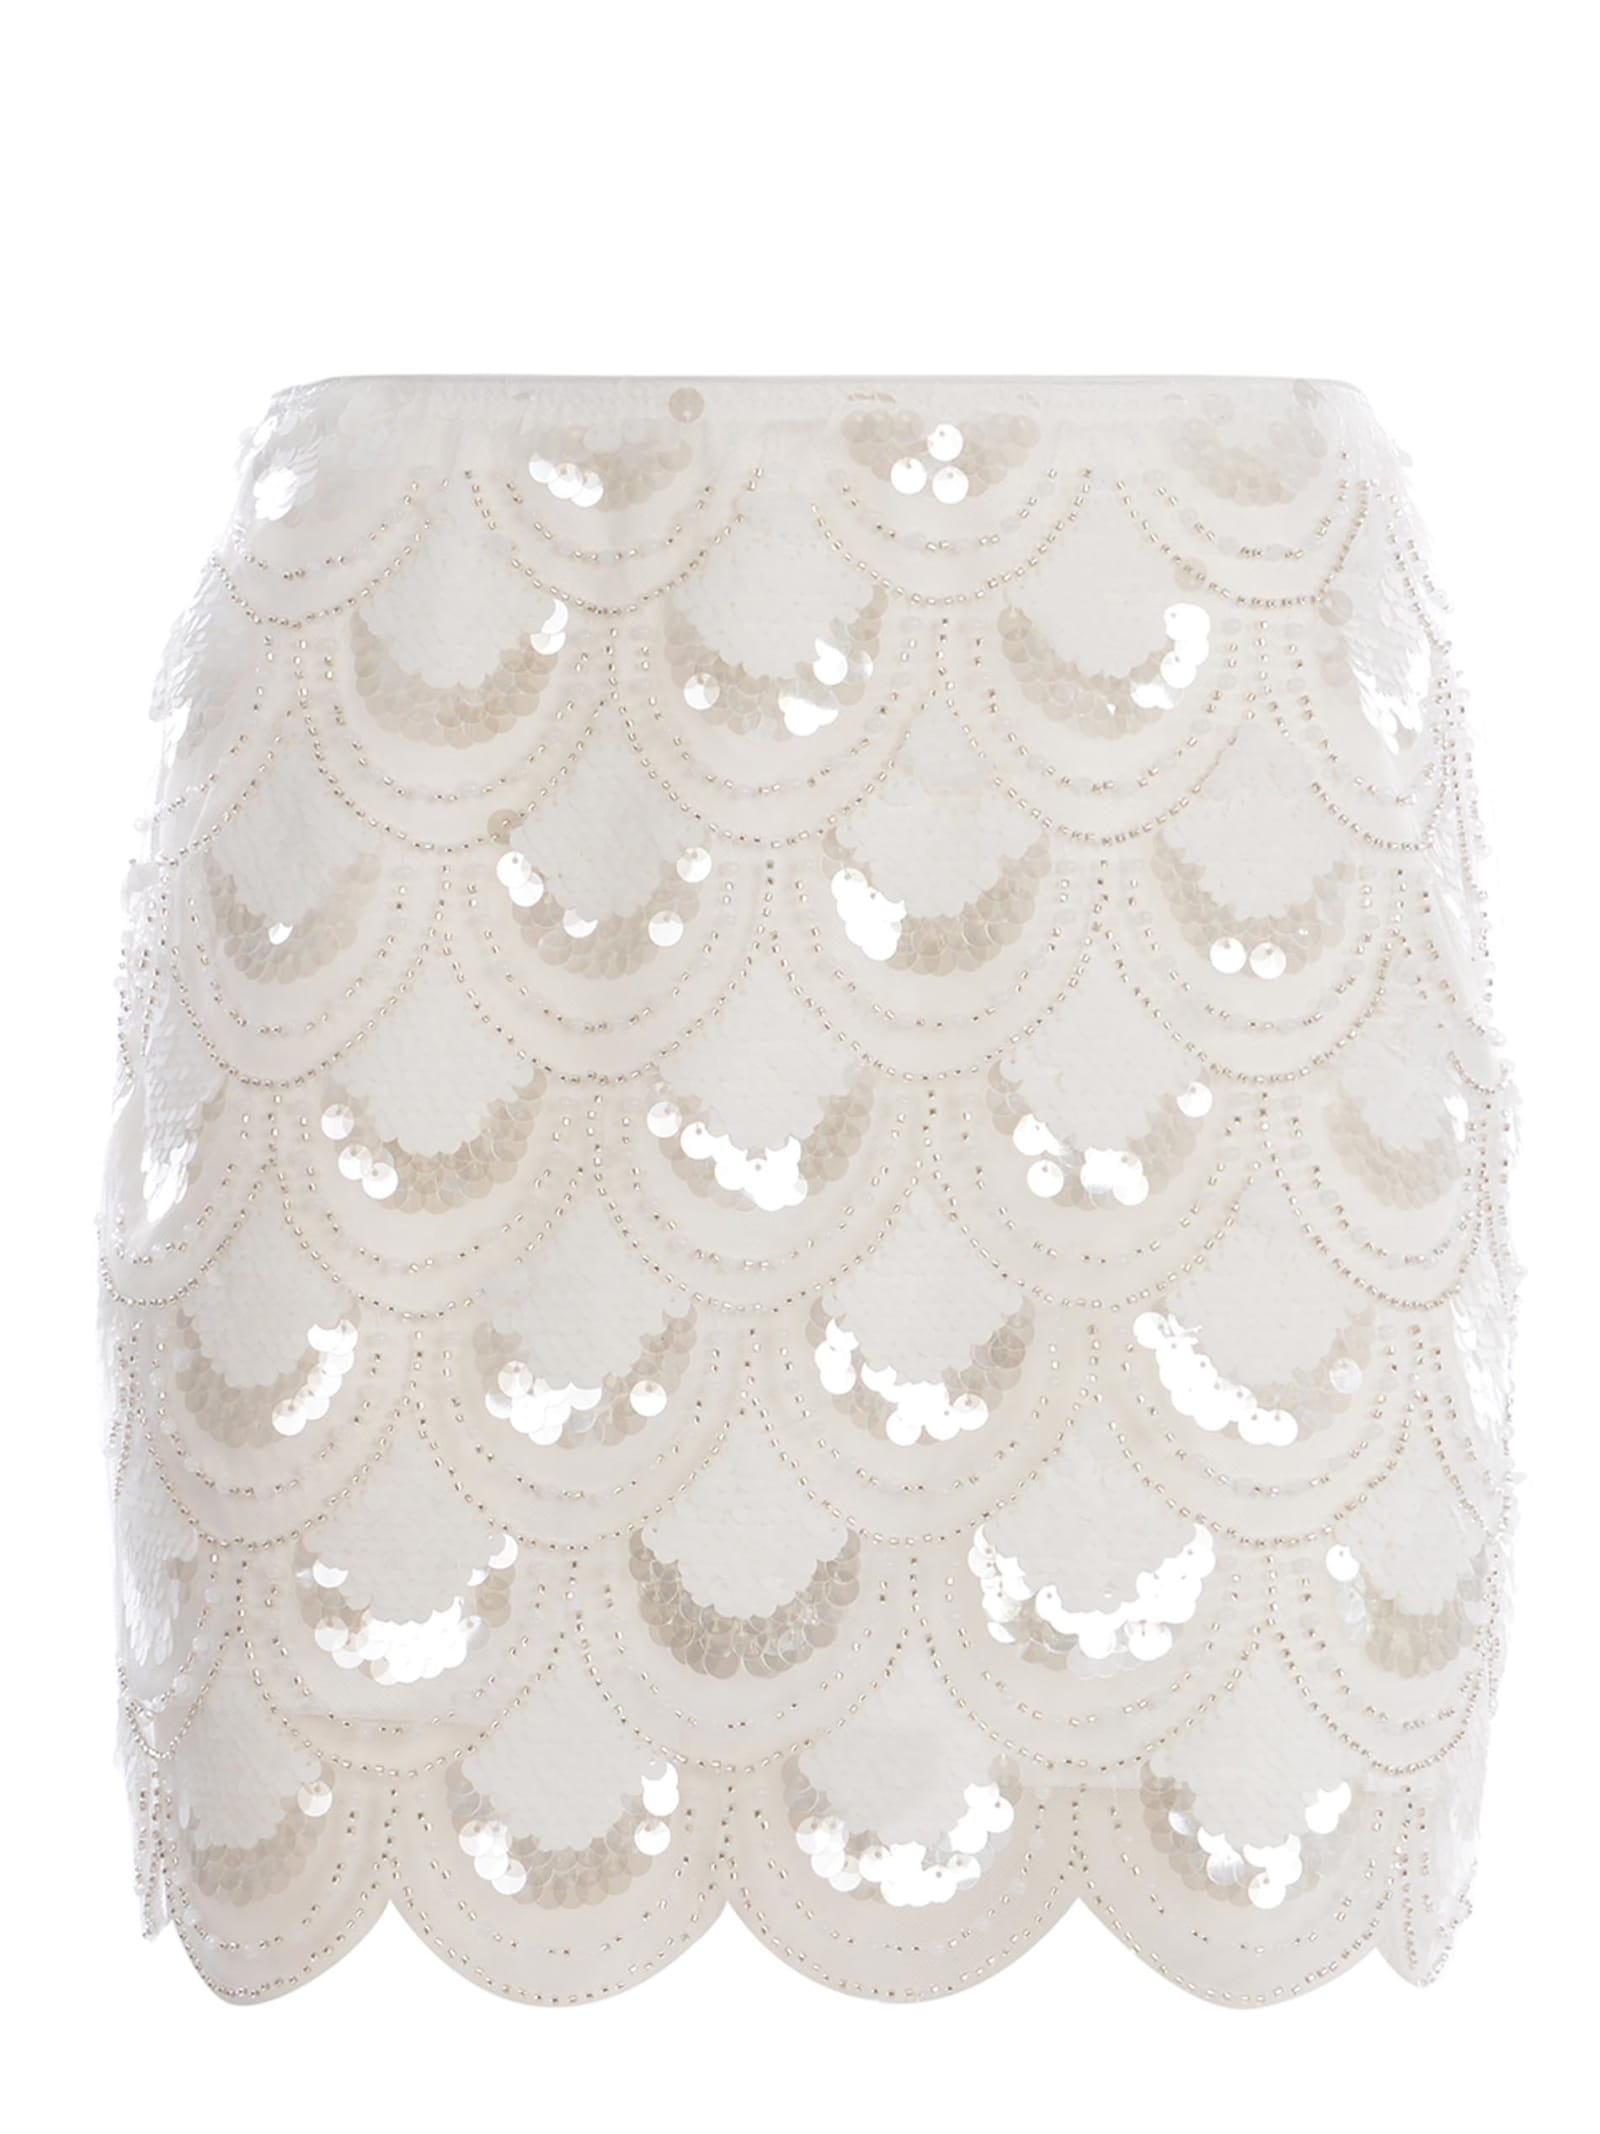 Shop Rotate Birger Christensen Skirt Rotate Made With Sequins In Bianco